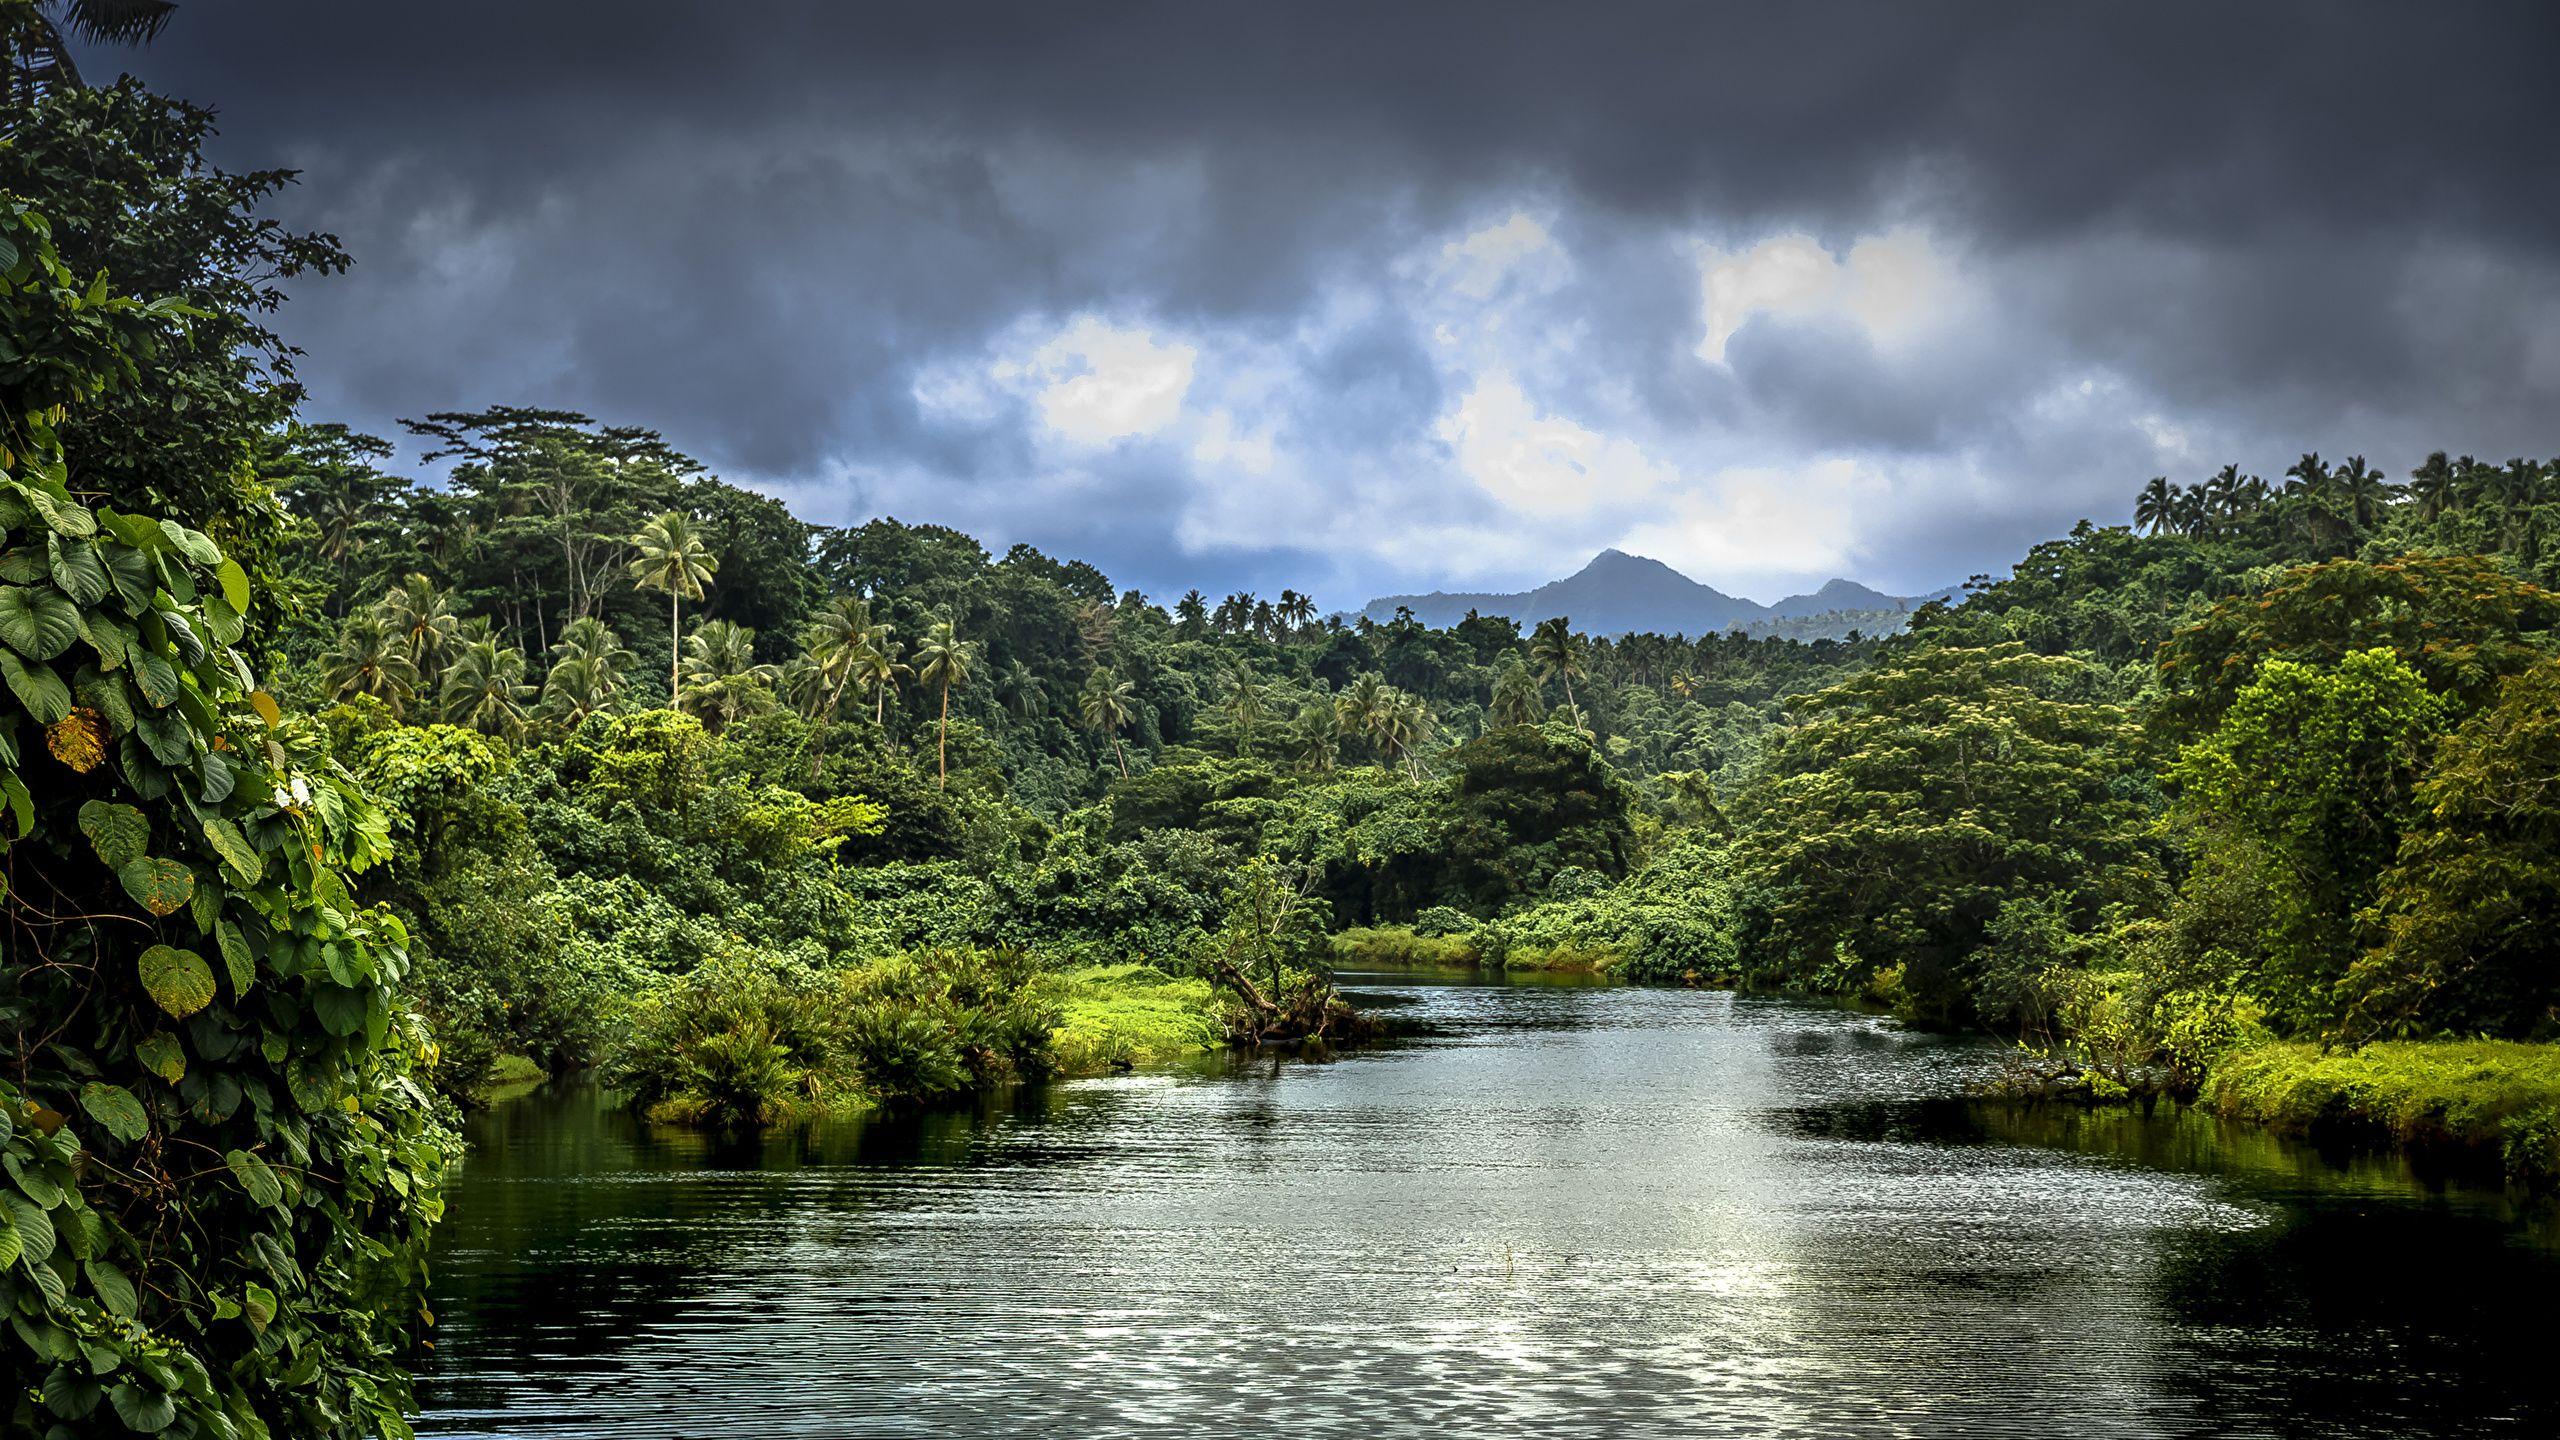 Wallpapers Samoa Nature Forests Tropics Rivers Clouds 2560x1440.